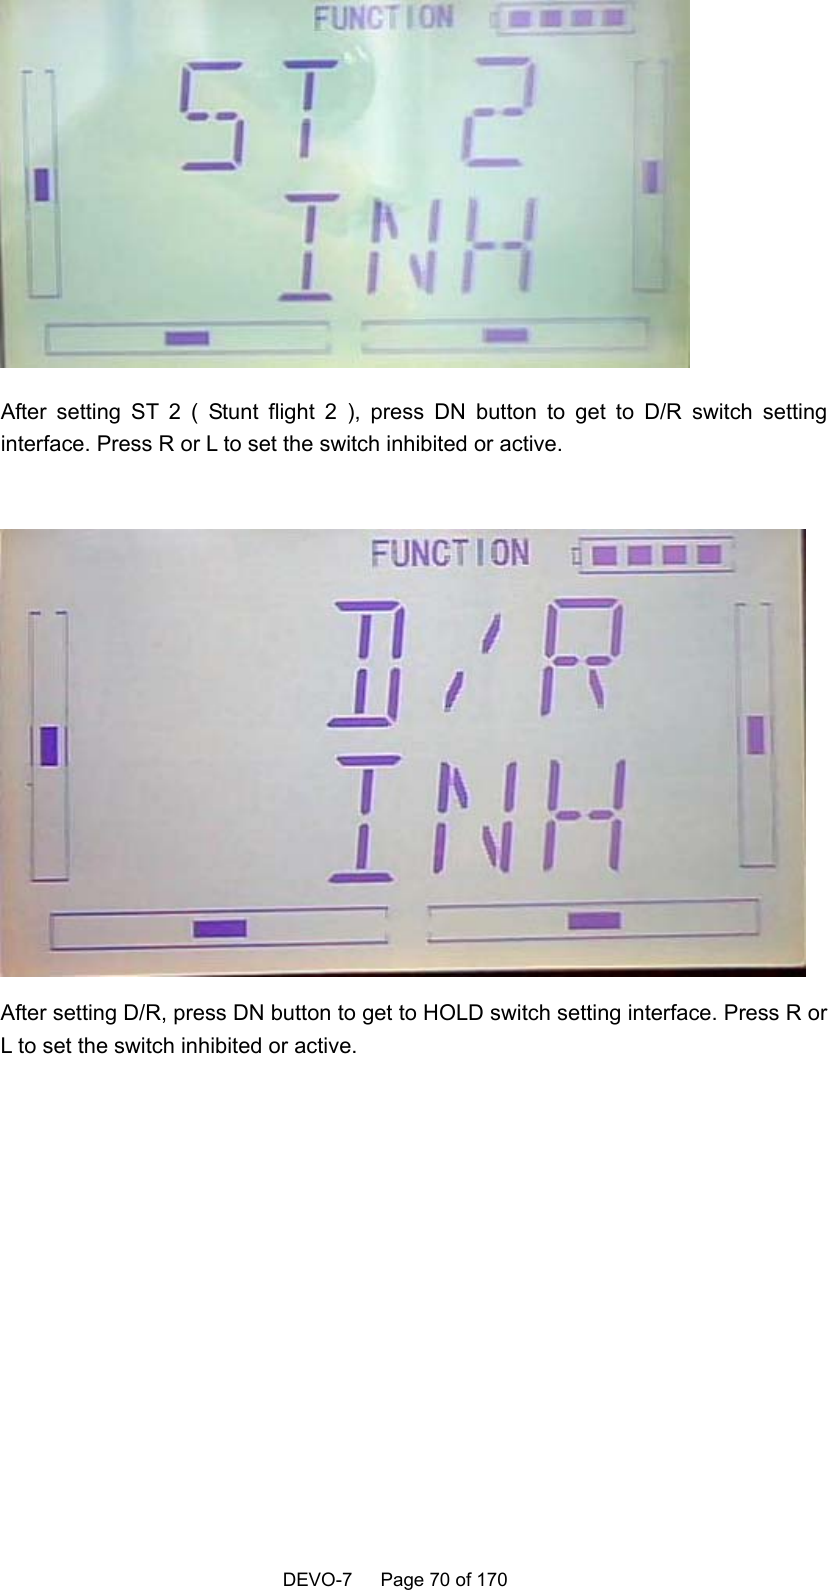    DEVO-7   Page 70 of 170    After setting ST 2 ( Stunt flight 2 ), press DN button to get to D/R switch setting interface. Press R or L to set the switch inhibited or active.   After setting D/R, press DN button to get to HOLD switch setting interface. Press R or L to set the switch inhibited or active.  